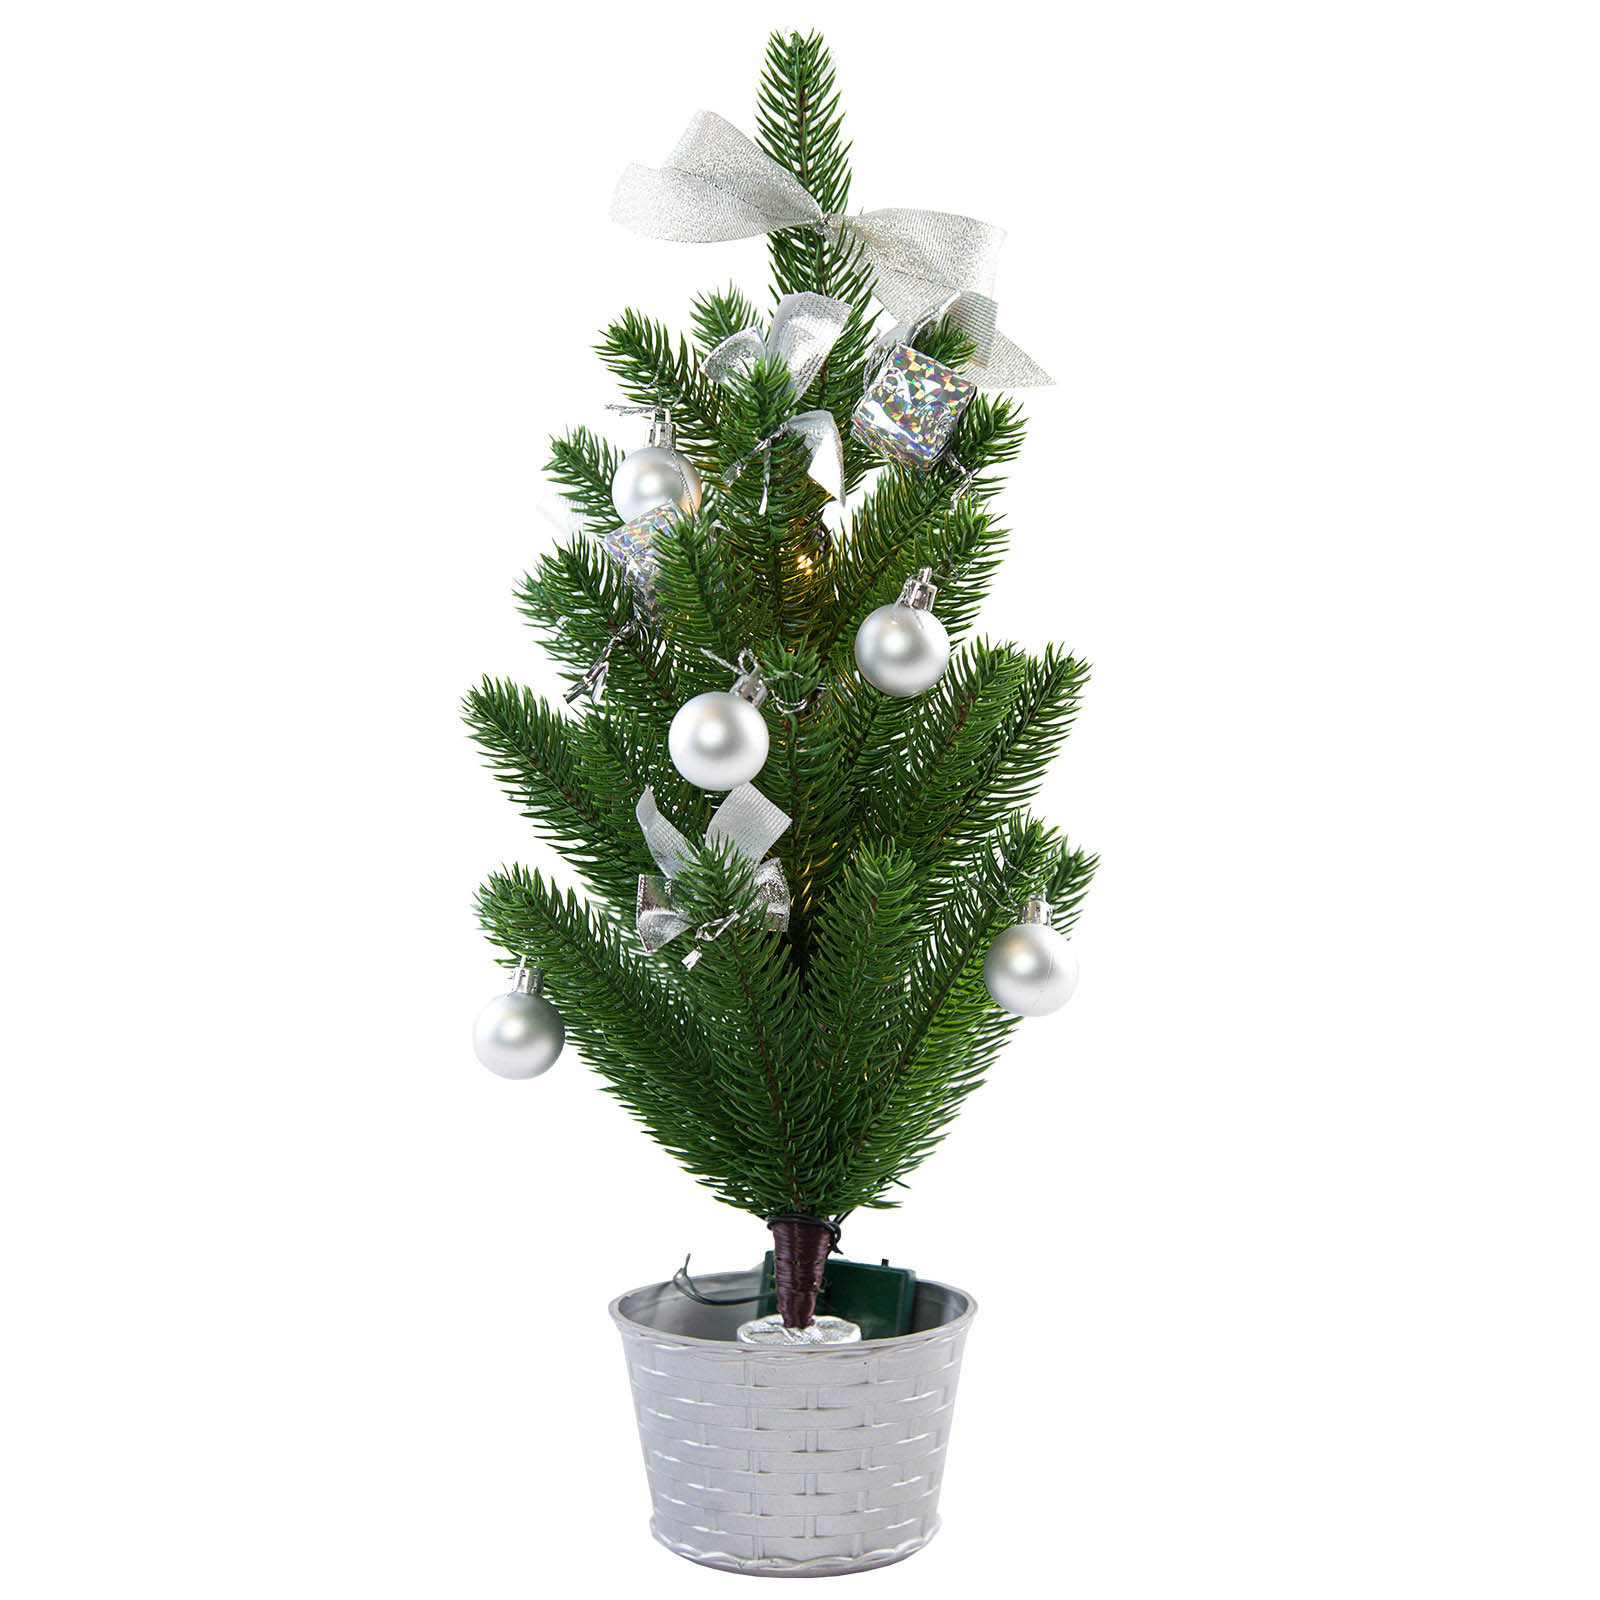 LED Christmas tree with silver decorations